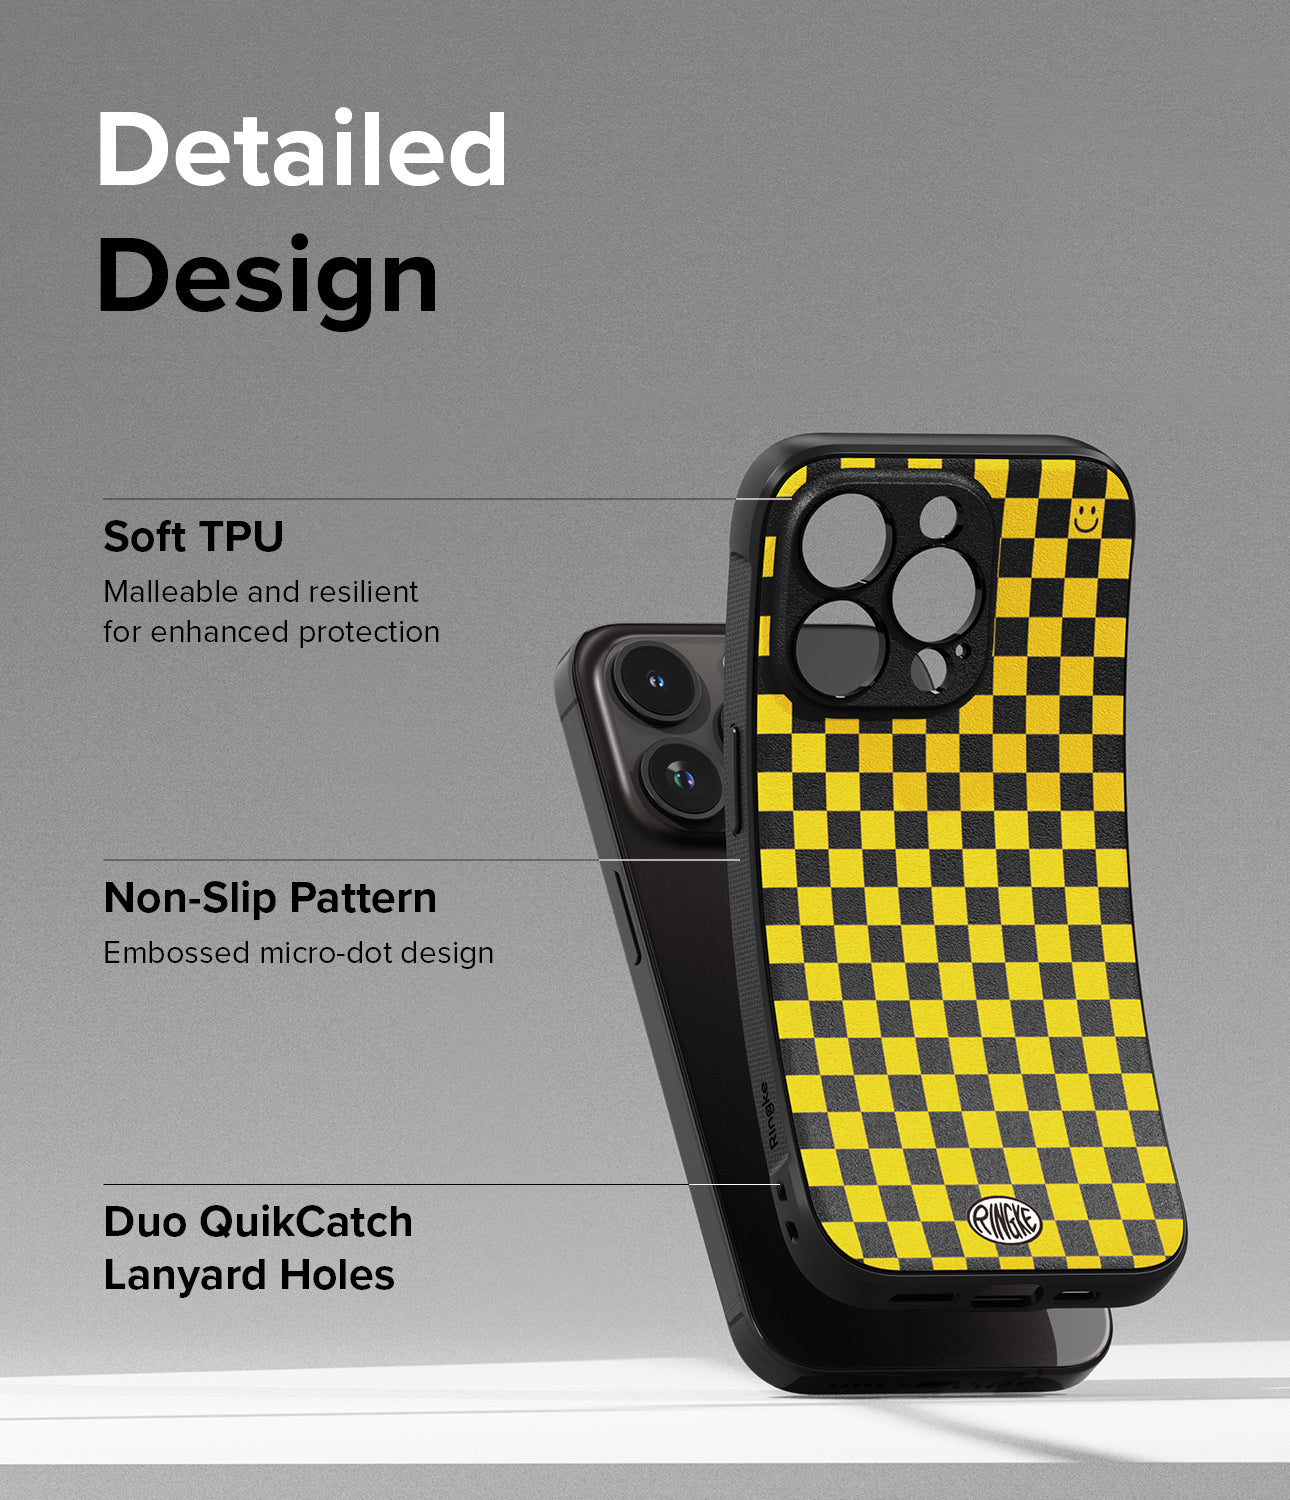 iPhone 15 Pro Max Case | Onyx Design - Checkerboard Yellow - Detailed Design. Malleable and resilient for enhanced protection with Soft TPU. Embossed micro-dot design with Non-Slip Pattern. Duo QuikCatch Lanyard Holes.